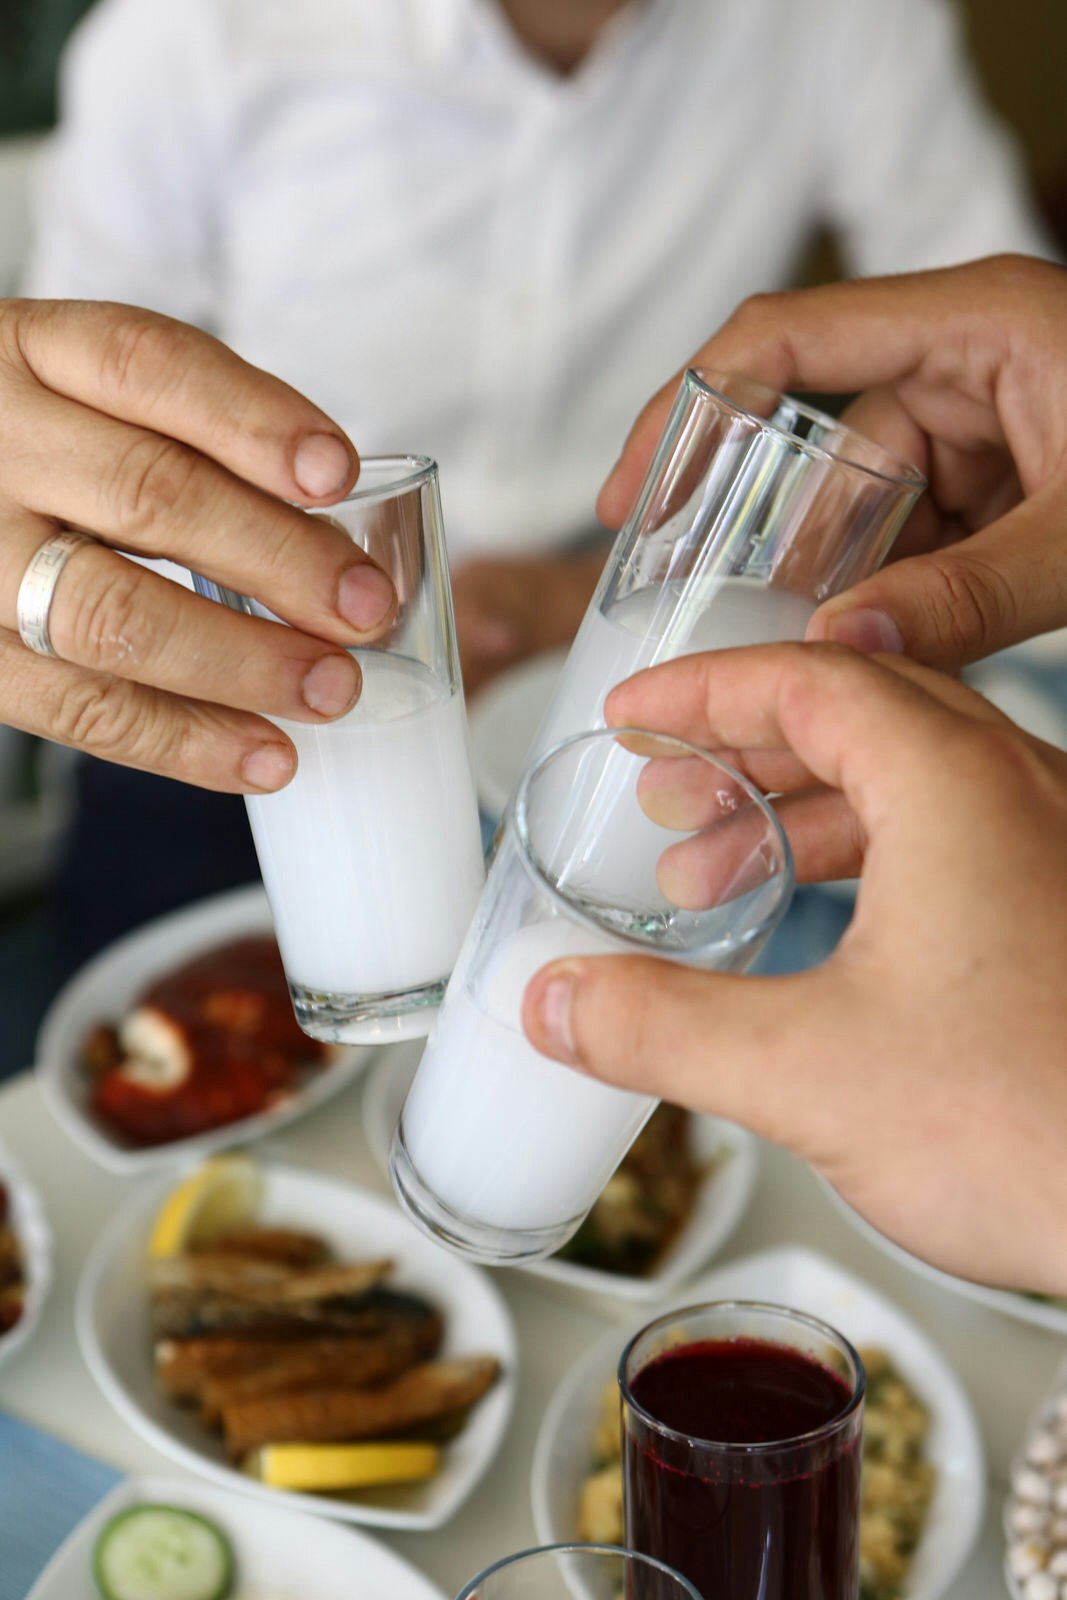 Three people clinking shot glasses of white ouzo together over a table of food